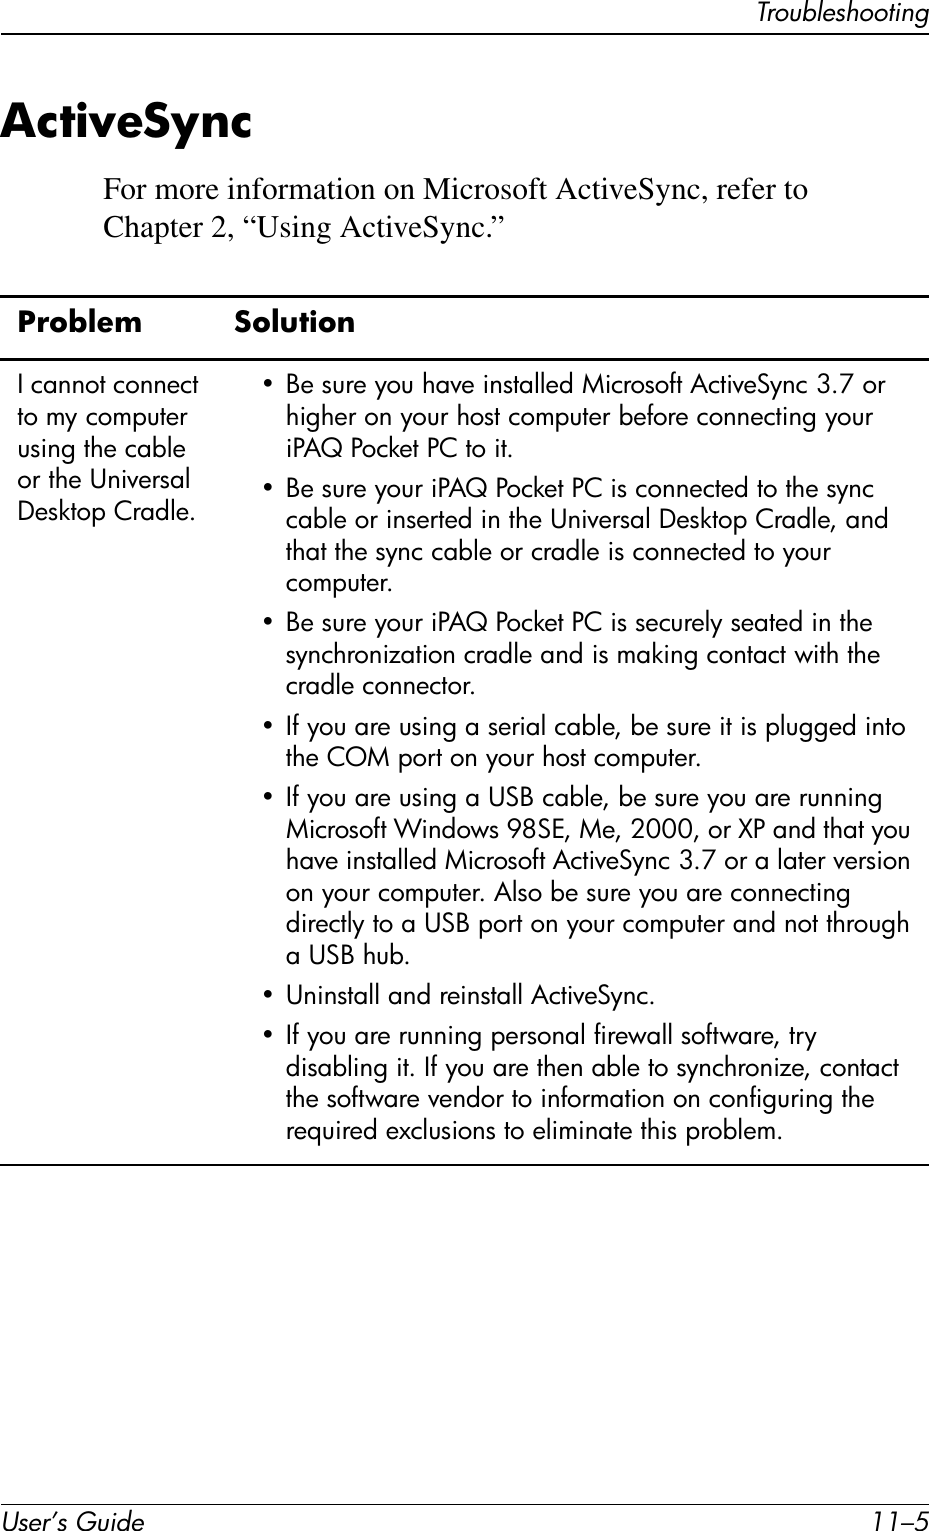 TroubleshootingUser’s Guide 11–5ActiveSyncFor more information on Microsoft ActiveSync, refer to Chapter 2, “Using ActiveSync.”Problem SolutionI cannot connect to my computer using the cable or the Universal Desktop Cradle.• Be sure you have installed Microsoft ActiveSync 3.7 or higher on your host computer before connecting your iPAQ Pocket PC to it.• Be sure your iPAQ Pocket PC is connected to the sync cable or inserted in the Universal Desktop Cradle, and that the sync cable or cradle is connected to your computer.• Be sure your iPAQ Pocket PC is securely seated in the synchronization cradle and is making contact with the cradle connector.• If you are using a serial cable, be sure it is plugged into the COM port on your host computer.• If you are using a USB cable, be sure you are running Microsoft Windows 98SE, Me, 2000, or XP and that you have installed Microsoft ActiveSync 3.7 or a later version on your computer. Also be sure you are connecting directly to a USB port on your computer and not through a USB hub.• Uninstall and reinstall ActiveSync.• If you are running personal firewall software, try disabling it. If you are then able to synchronize, contact the software vendor to information on configuring the required exclusions to eliminate this problem.